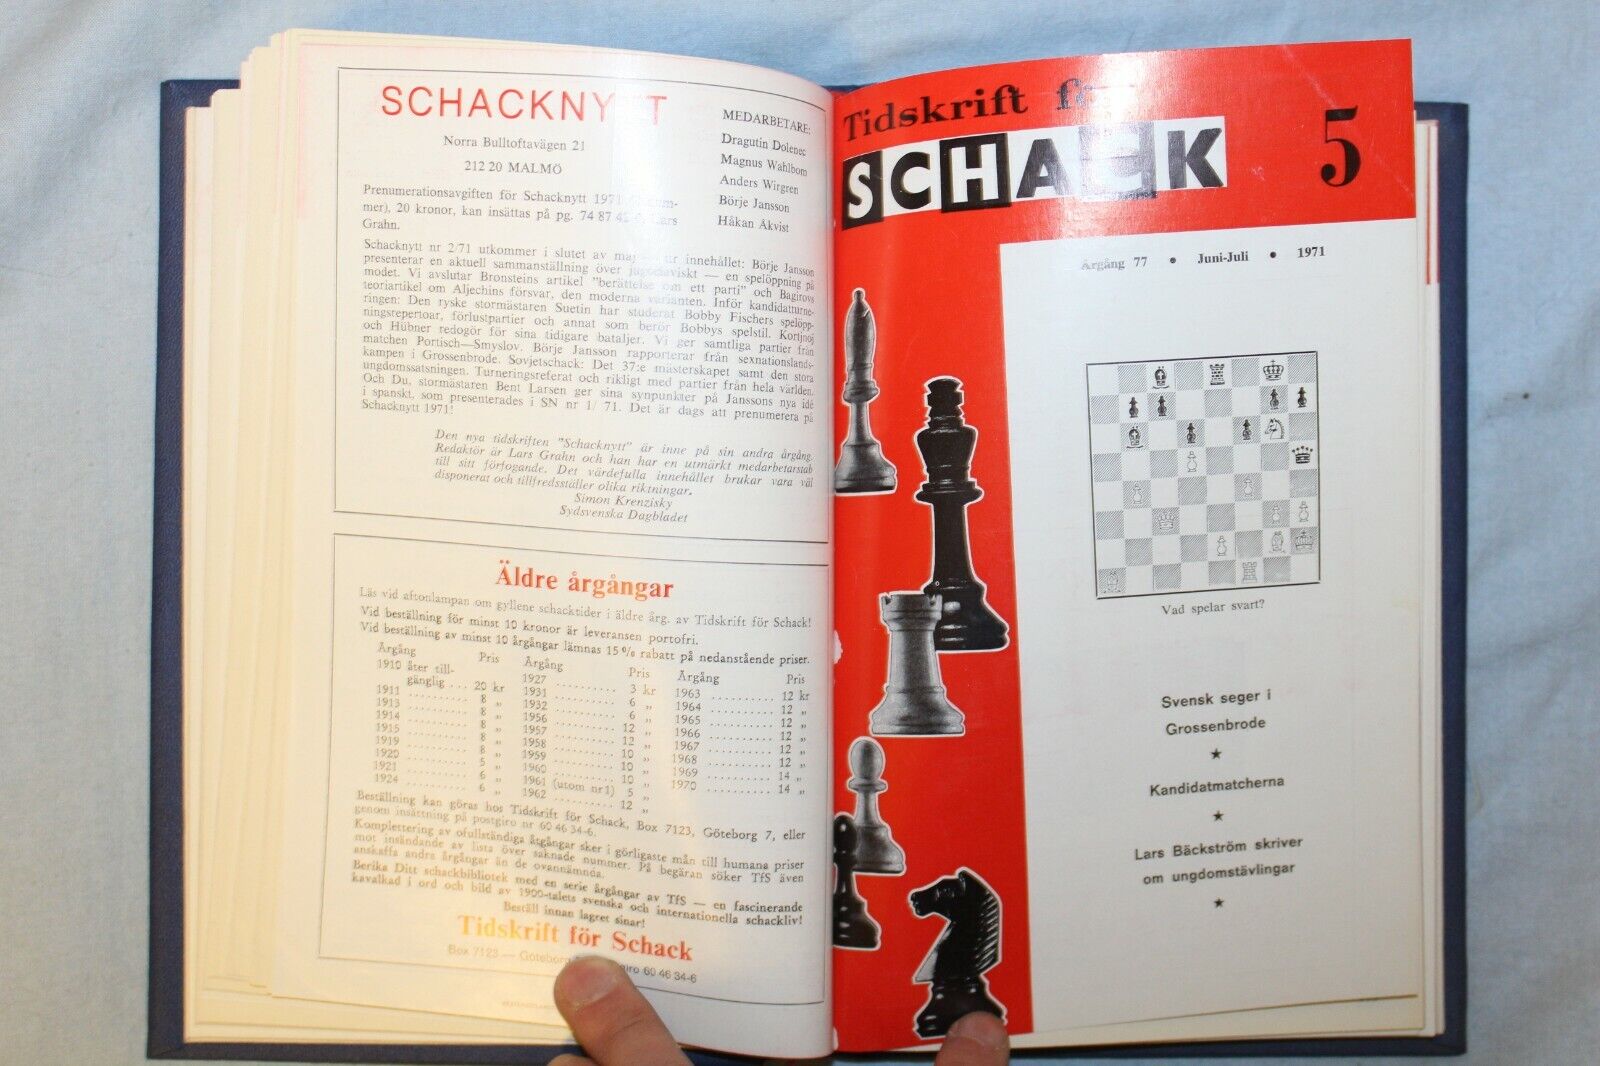 11885.Swedish Chess Magazine Tidskrift for Schack. Complete yearly set 10 issues. 1971